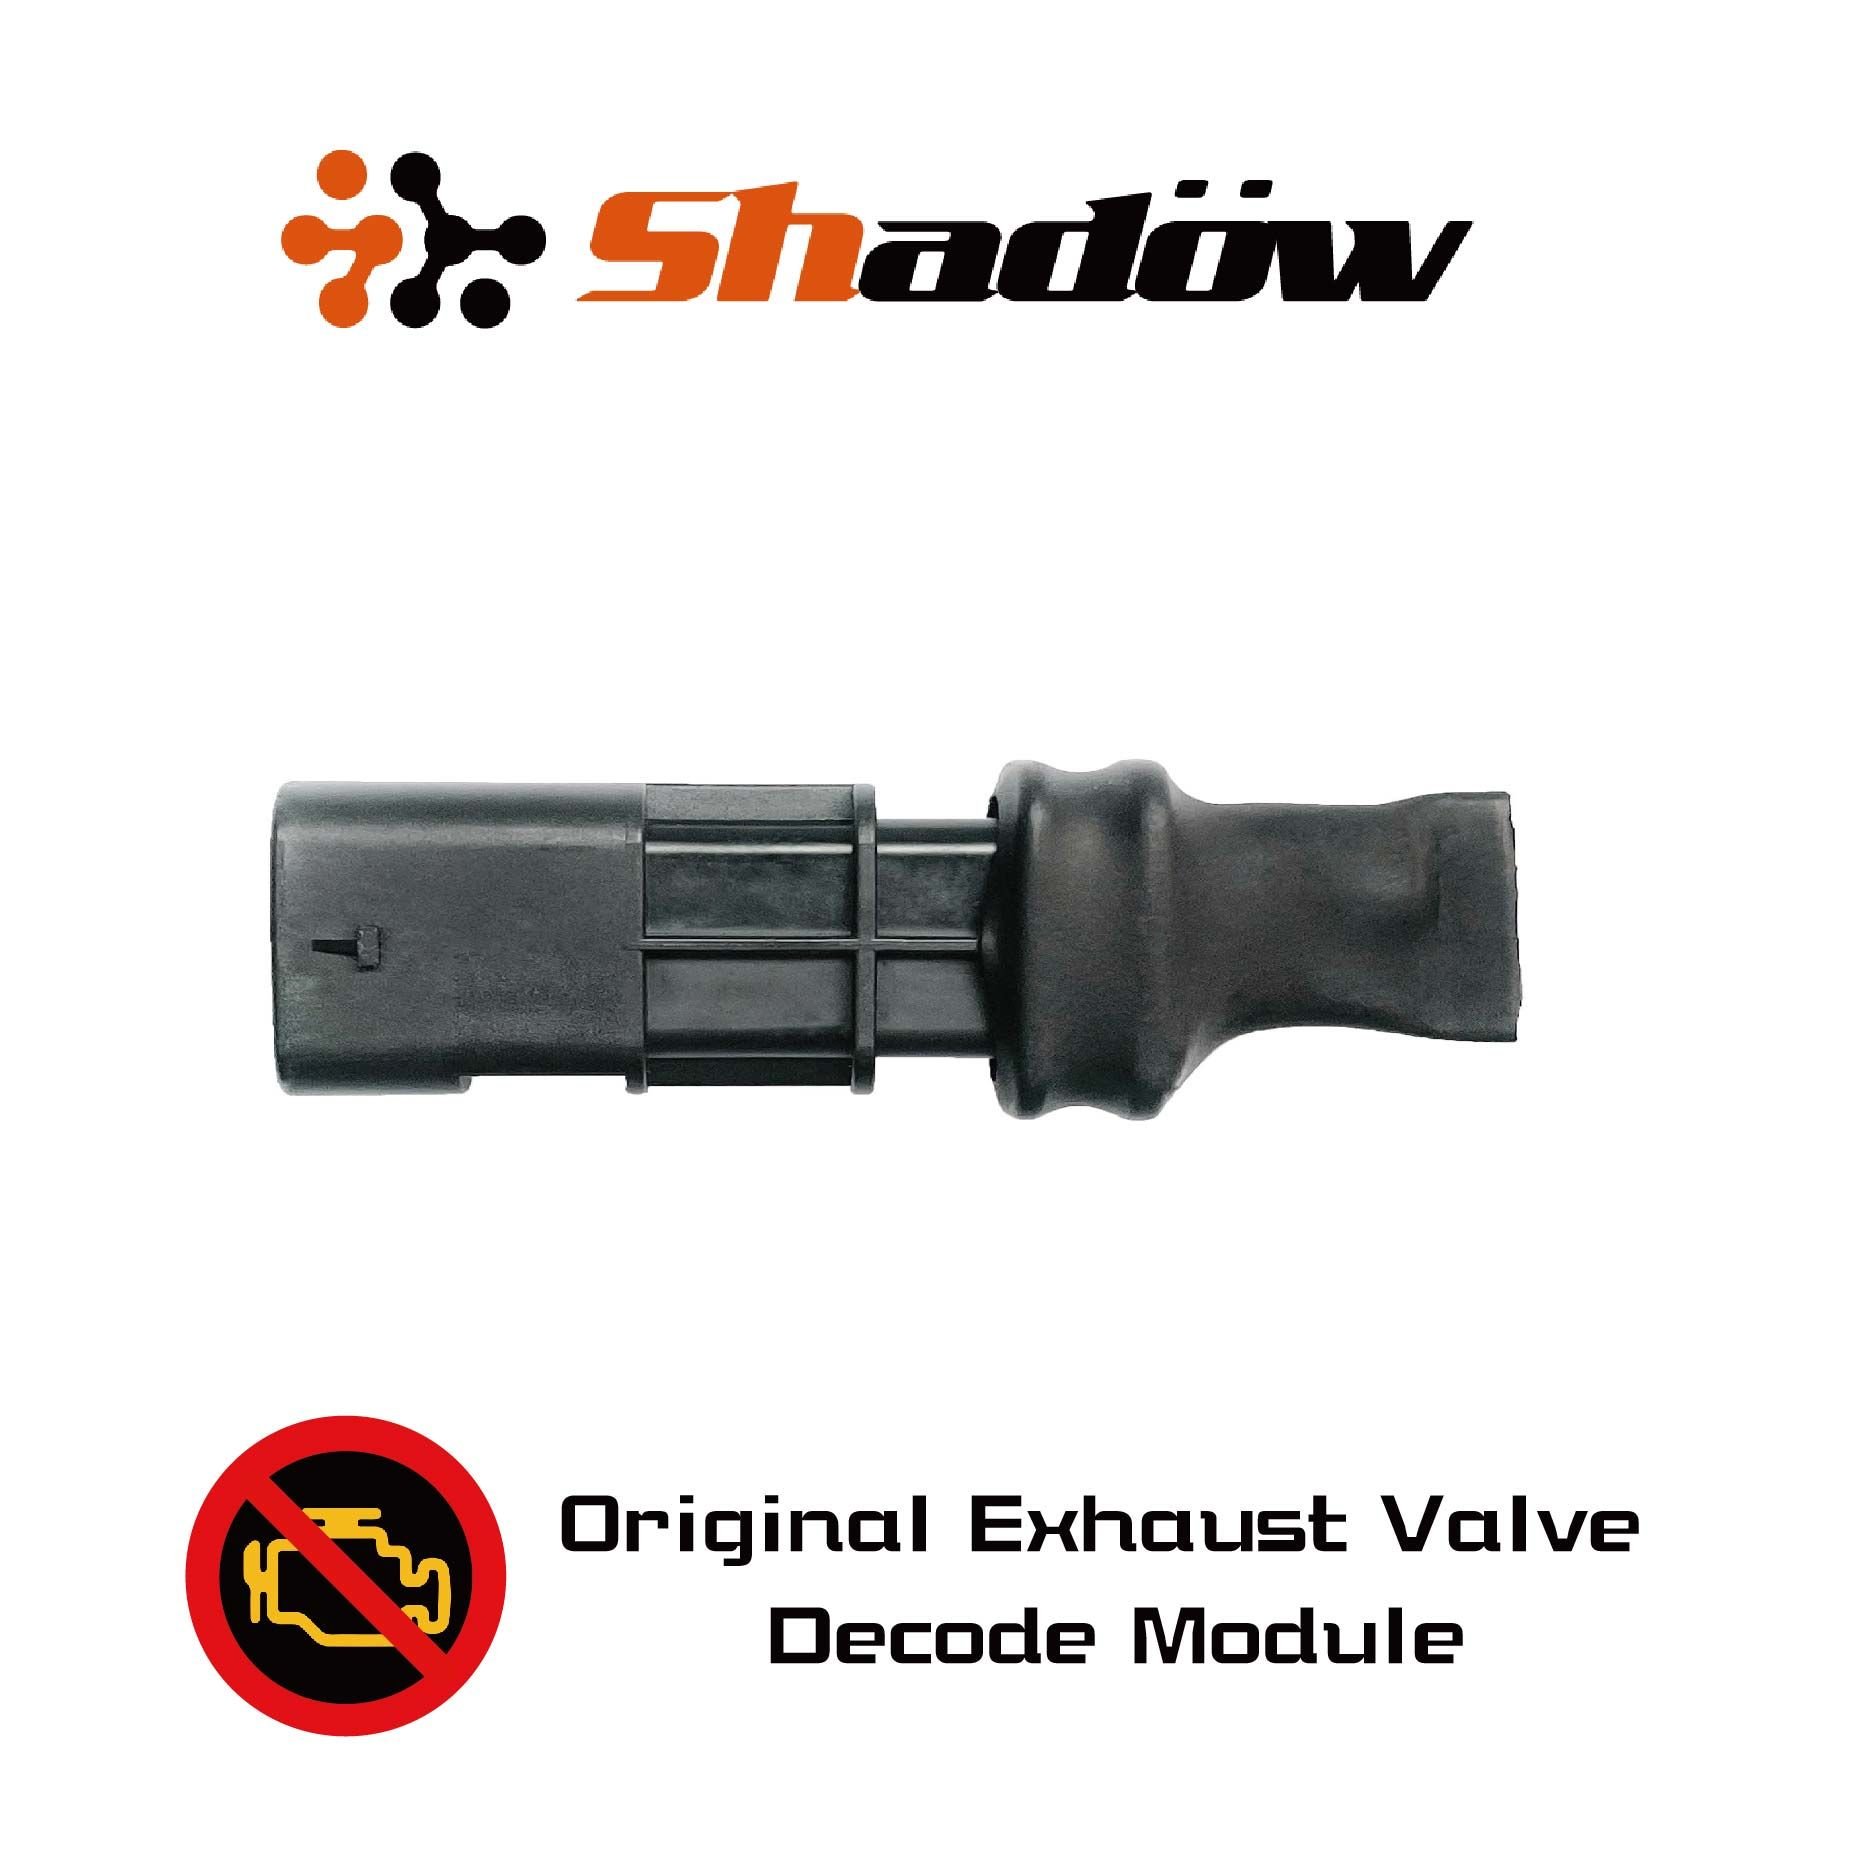 Eliminate the necessary accessories for electronic exhaust valves and signal bypass modules